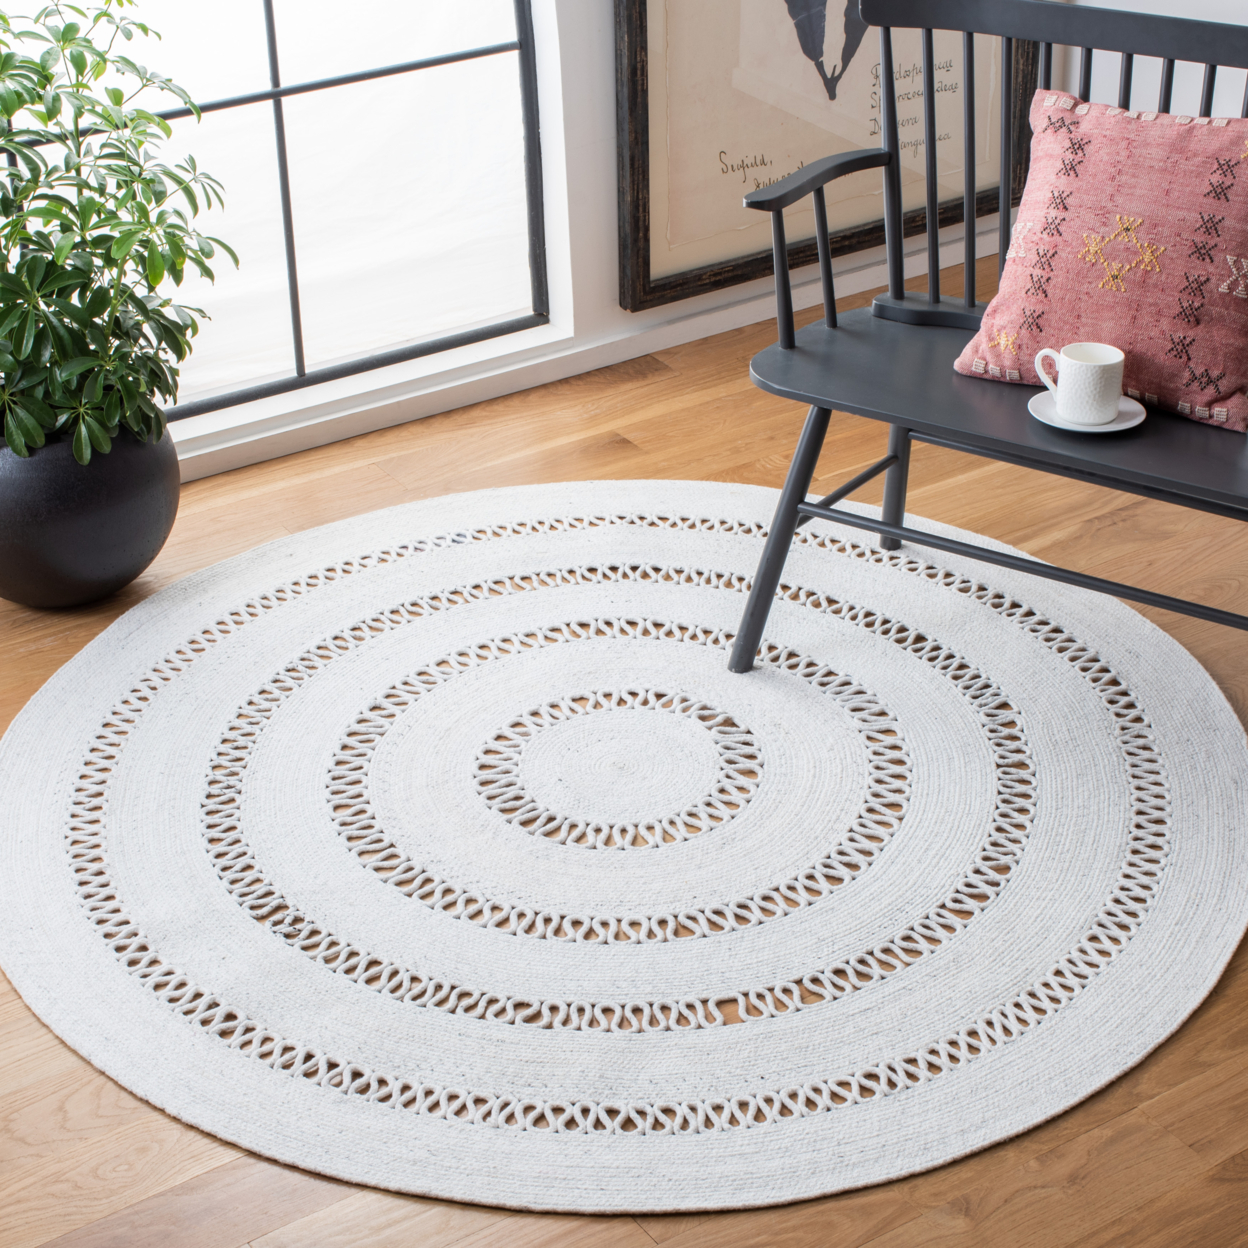 SAFAVIEH Cape Cod Collection CAP221A Handwoven Ivory Rug - 5' Round